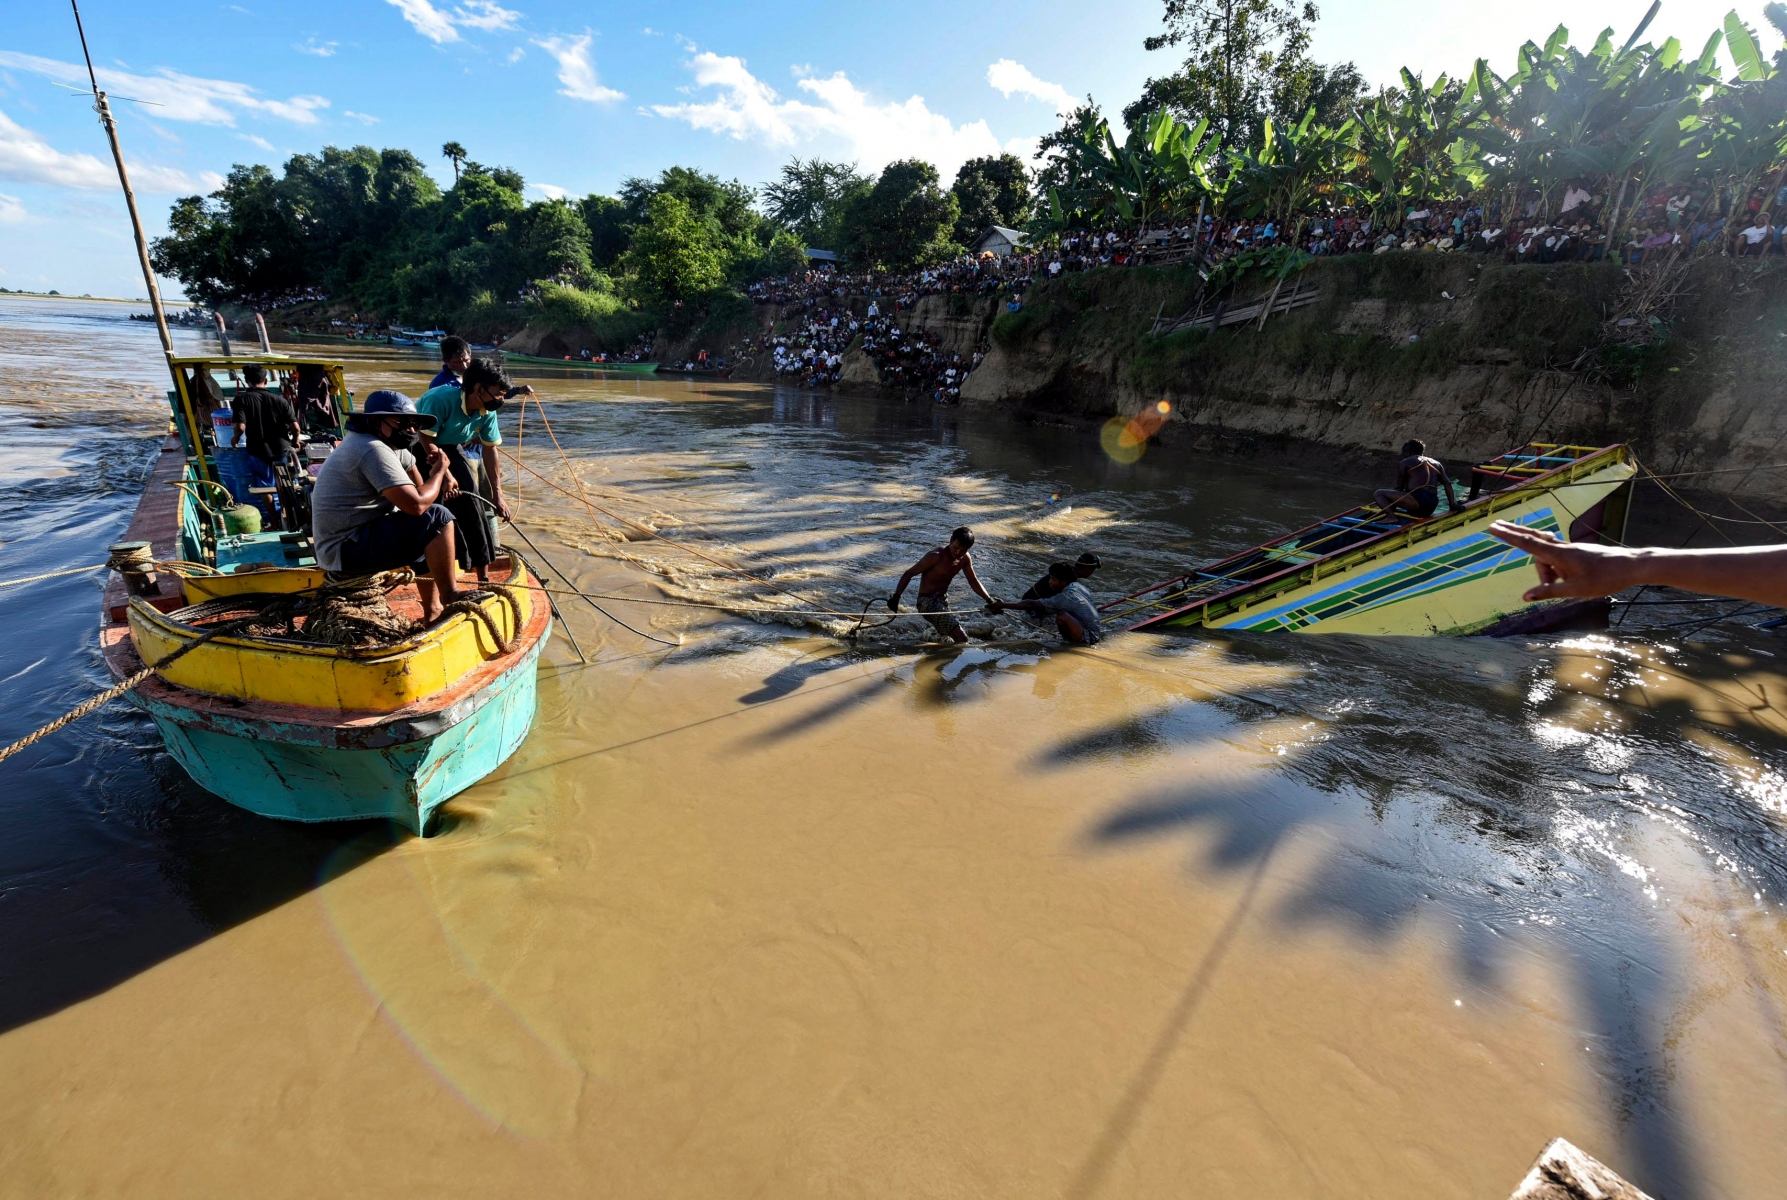 epa05590370 Local rescue workers try to pull a sunk ferry boat from the Chindwin river near the city of Monywa, Sagaing Division, Myanmar, 18 October 2016. Acoording to local sources, the death toll reached 44 while hundreds of people are still missing and are believe to be trapped inside the boat. So far 159 people survived the ferry boat accident after the vessel hit a rock in the water during a trip from Homelin to Monywa on 15 October 2016. Workers will continue to lift the boat from the riverbed on 19 October.  EPA/STRINGER MYANMAR FERRY BOAT ACCIDENT